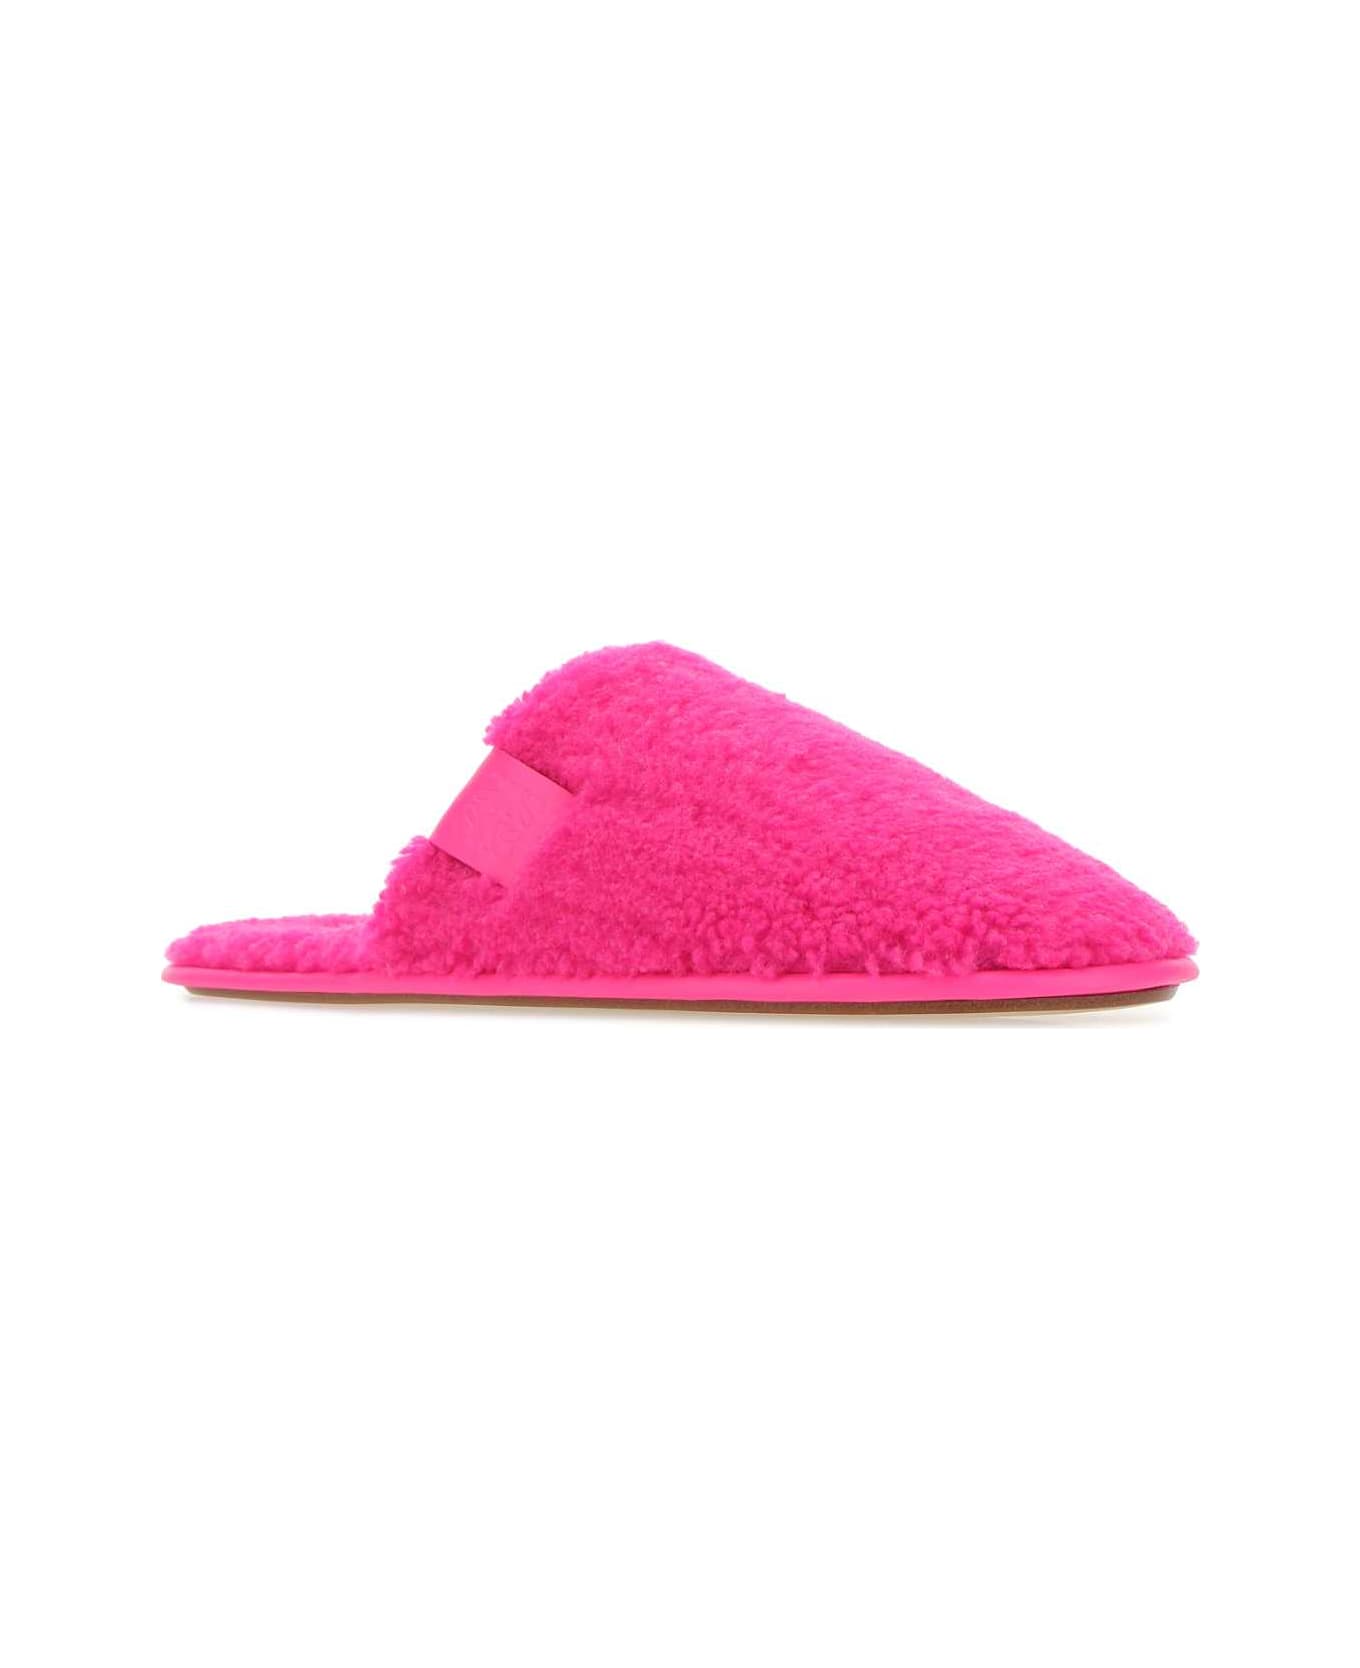 Loewe Fluo Pink Eco Shearling Slippers - NEONPINK その他各種シューズ